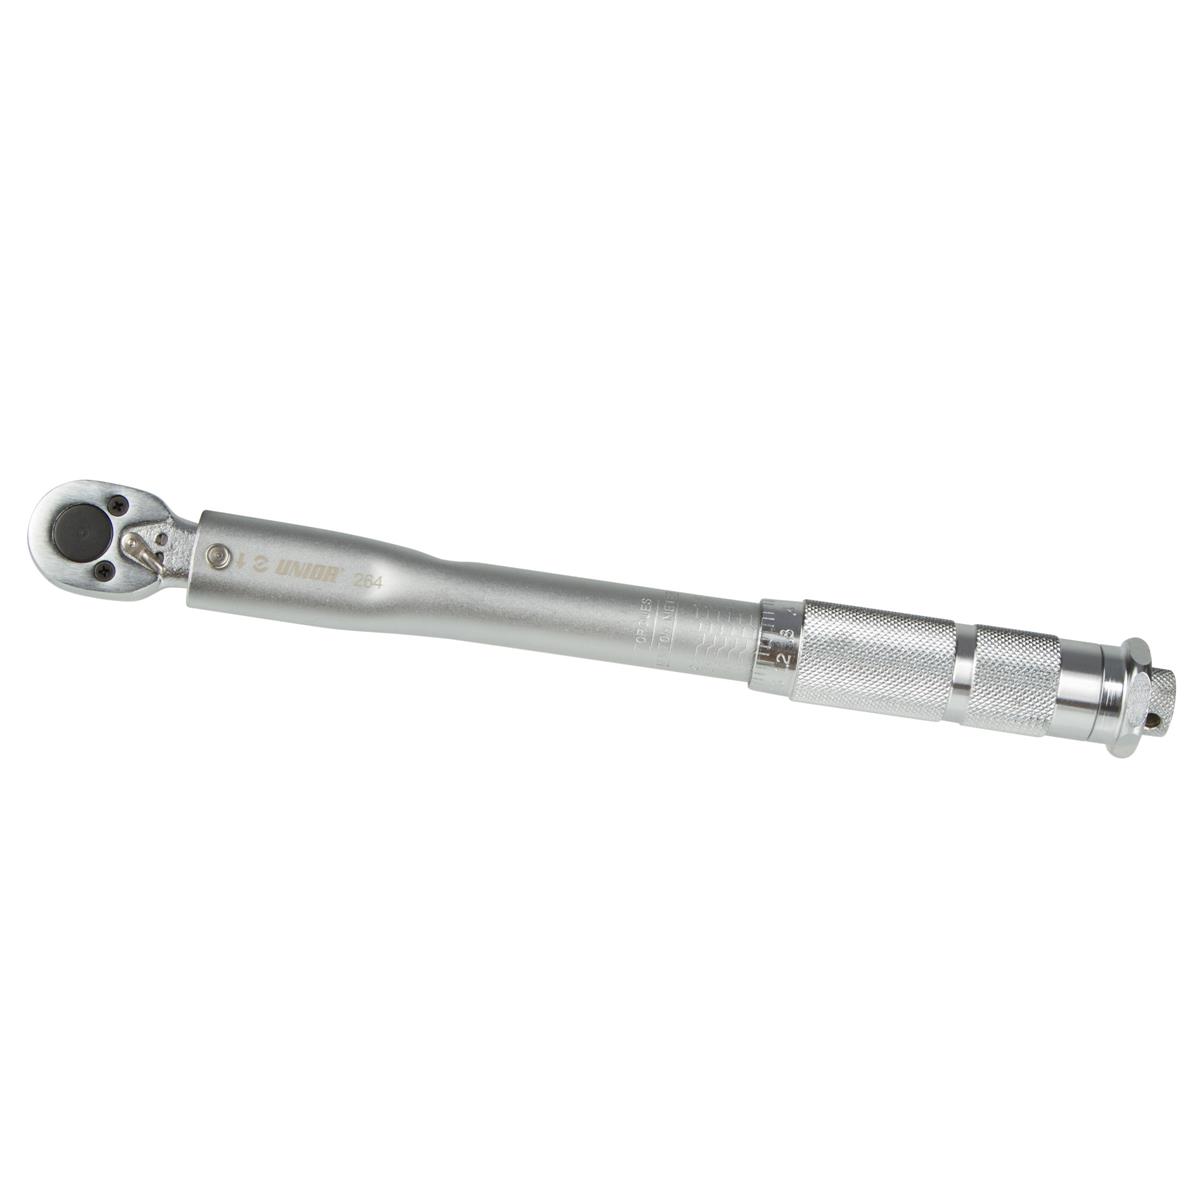 Unior Click Type Torque Wrench  270 mm, 1/4 Inch Socket